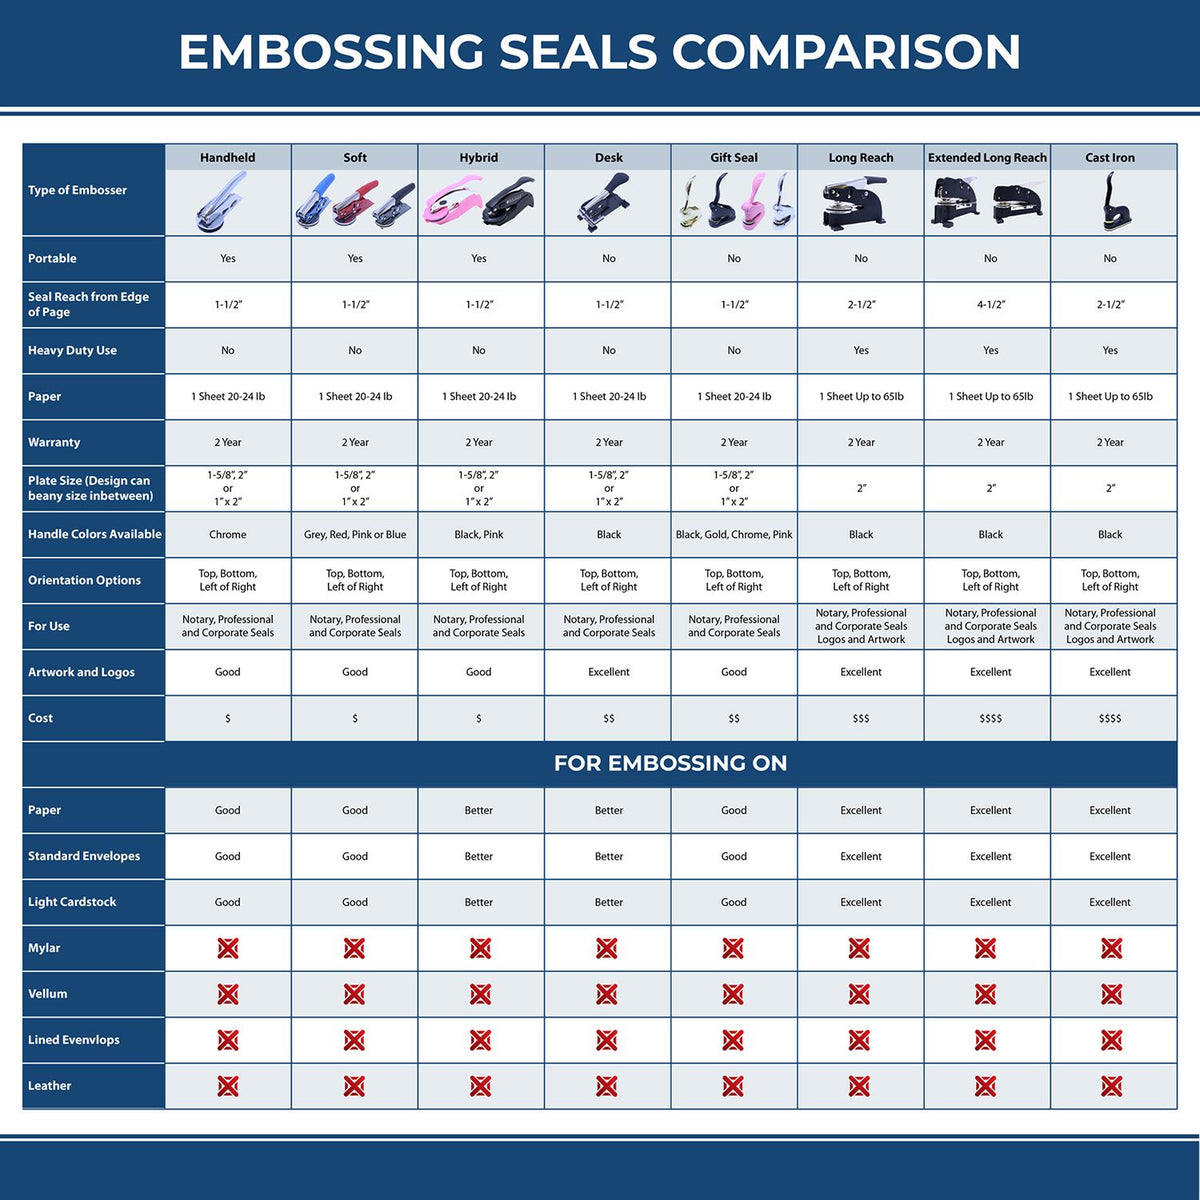 A comparison chart for the different types of mount models available for the Hybrid Virginia Land Surveyor Seal